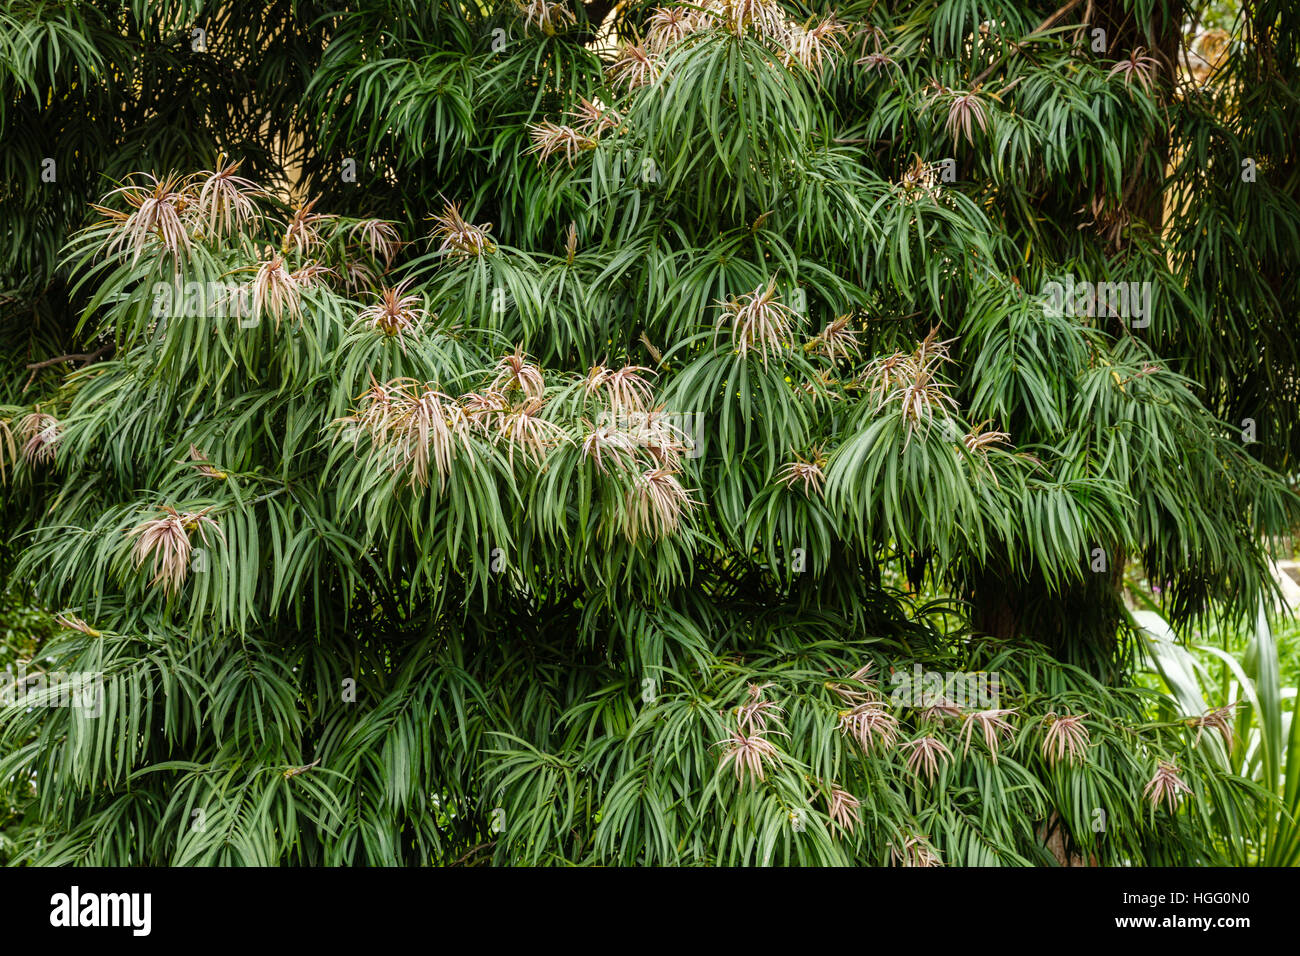 Podocarpus henkelii, foliage with young shoots in spring Stock Photo